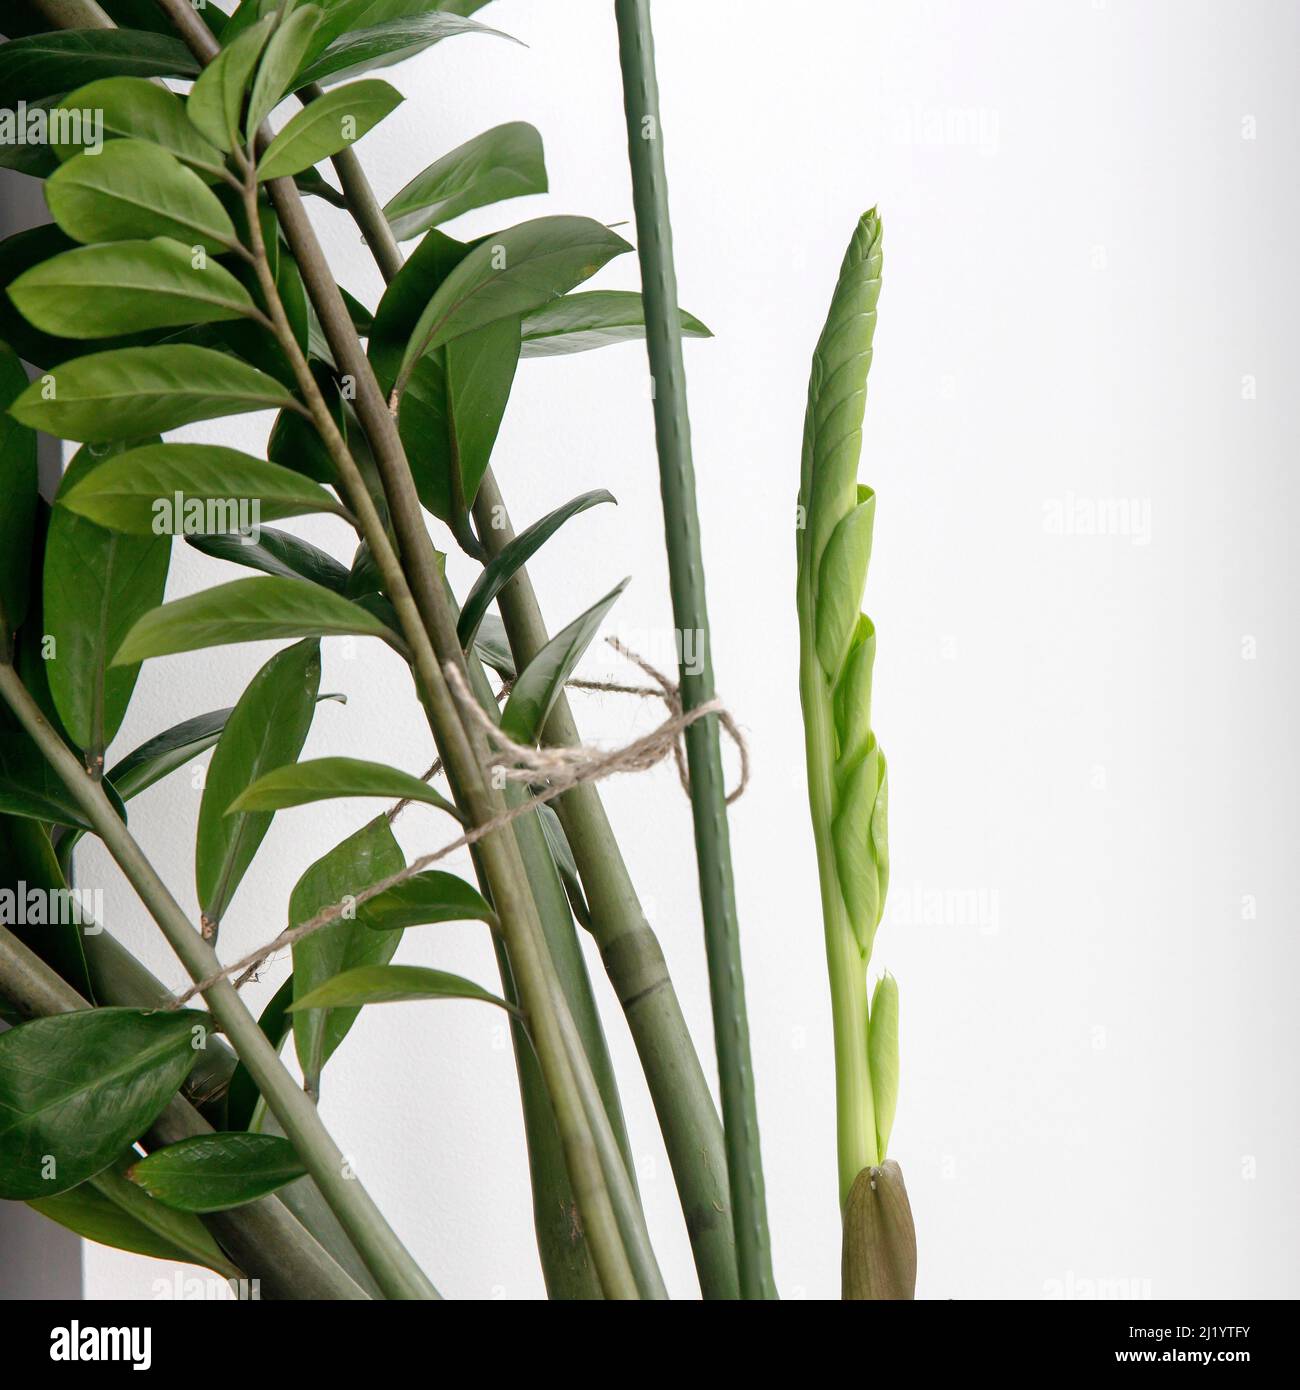 Zamioculcas plant. Fragment of a plant and a fresh shoot against a white wall Stock Photo